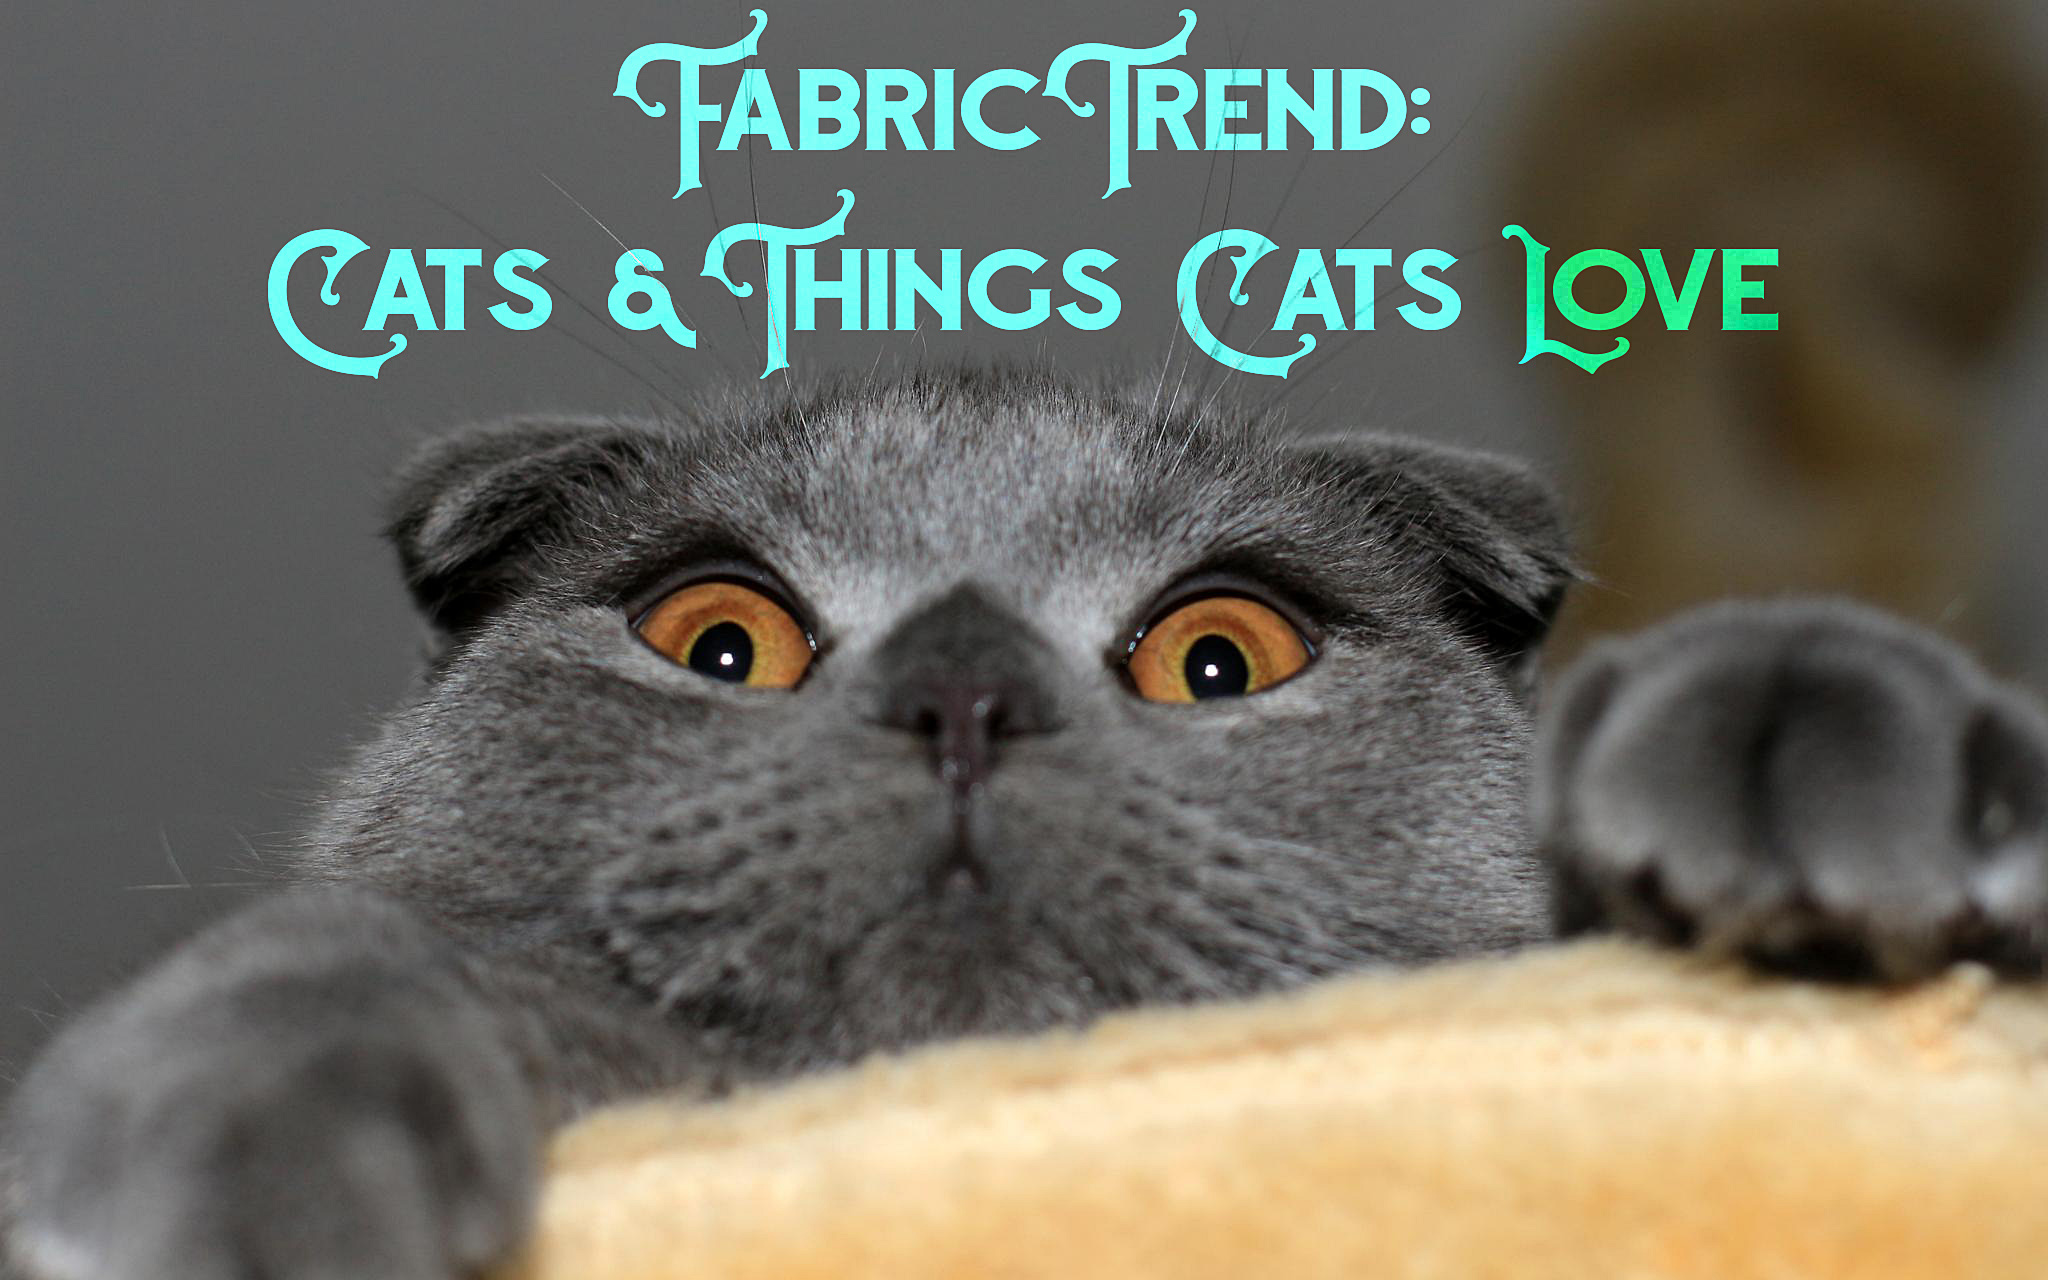 Fabric Trend: Cats and Things Cats Love